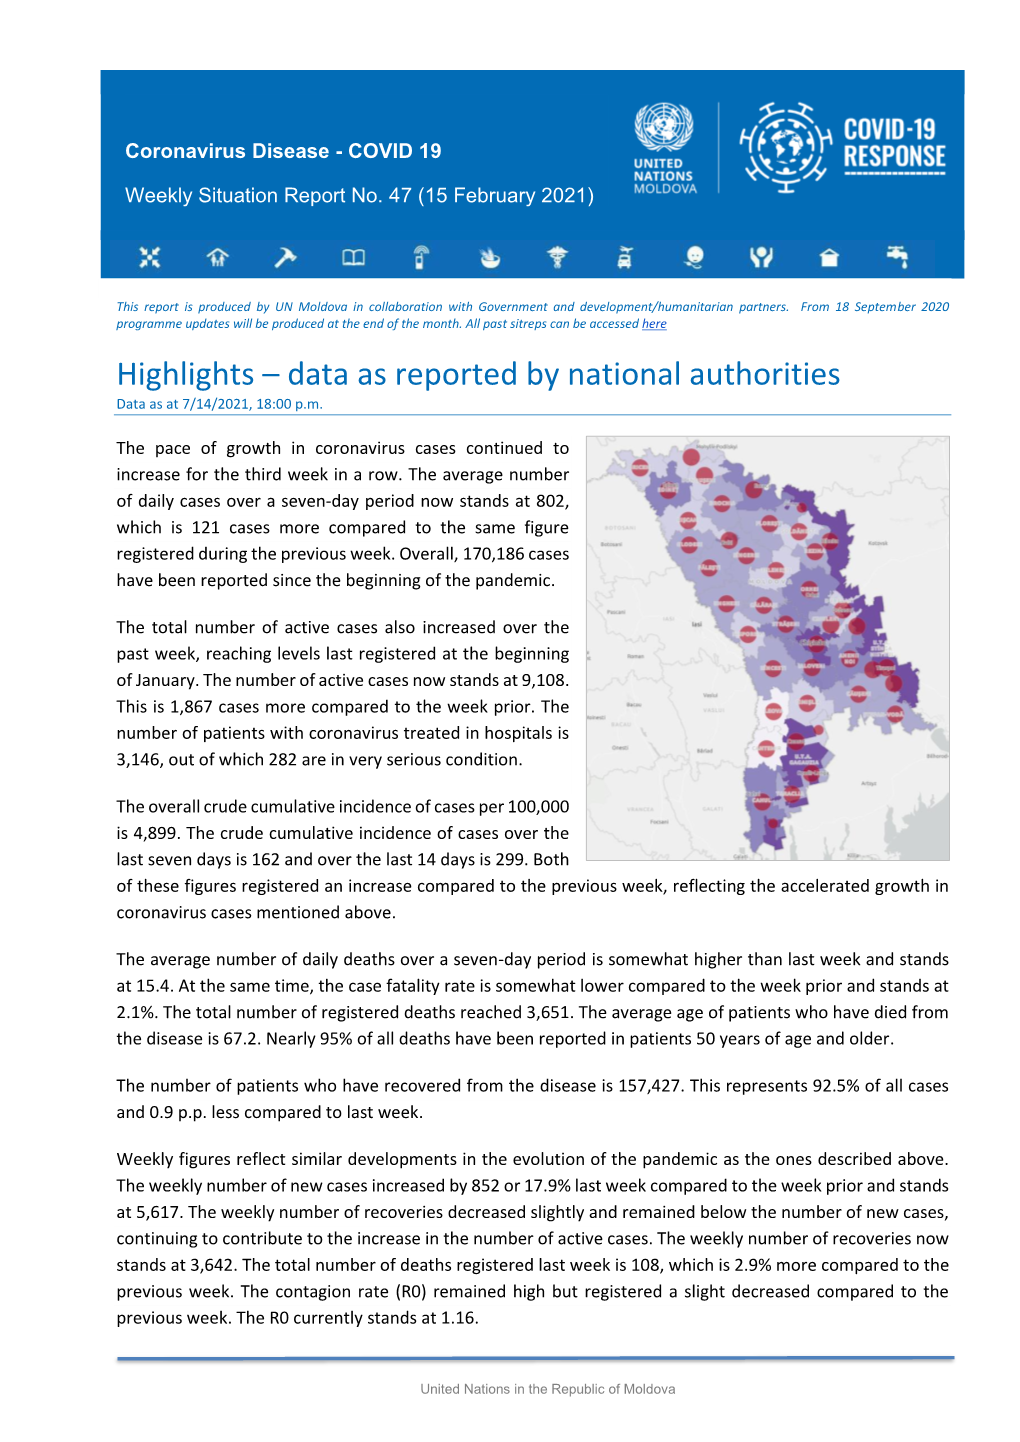 Highlights – Data As Reported by National Authorities Data As at 7/14/2021, 18:00 P.M